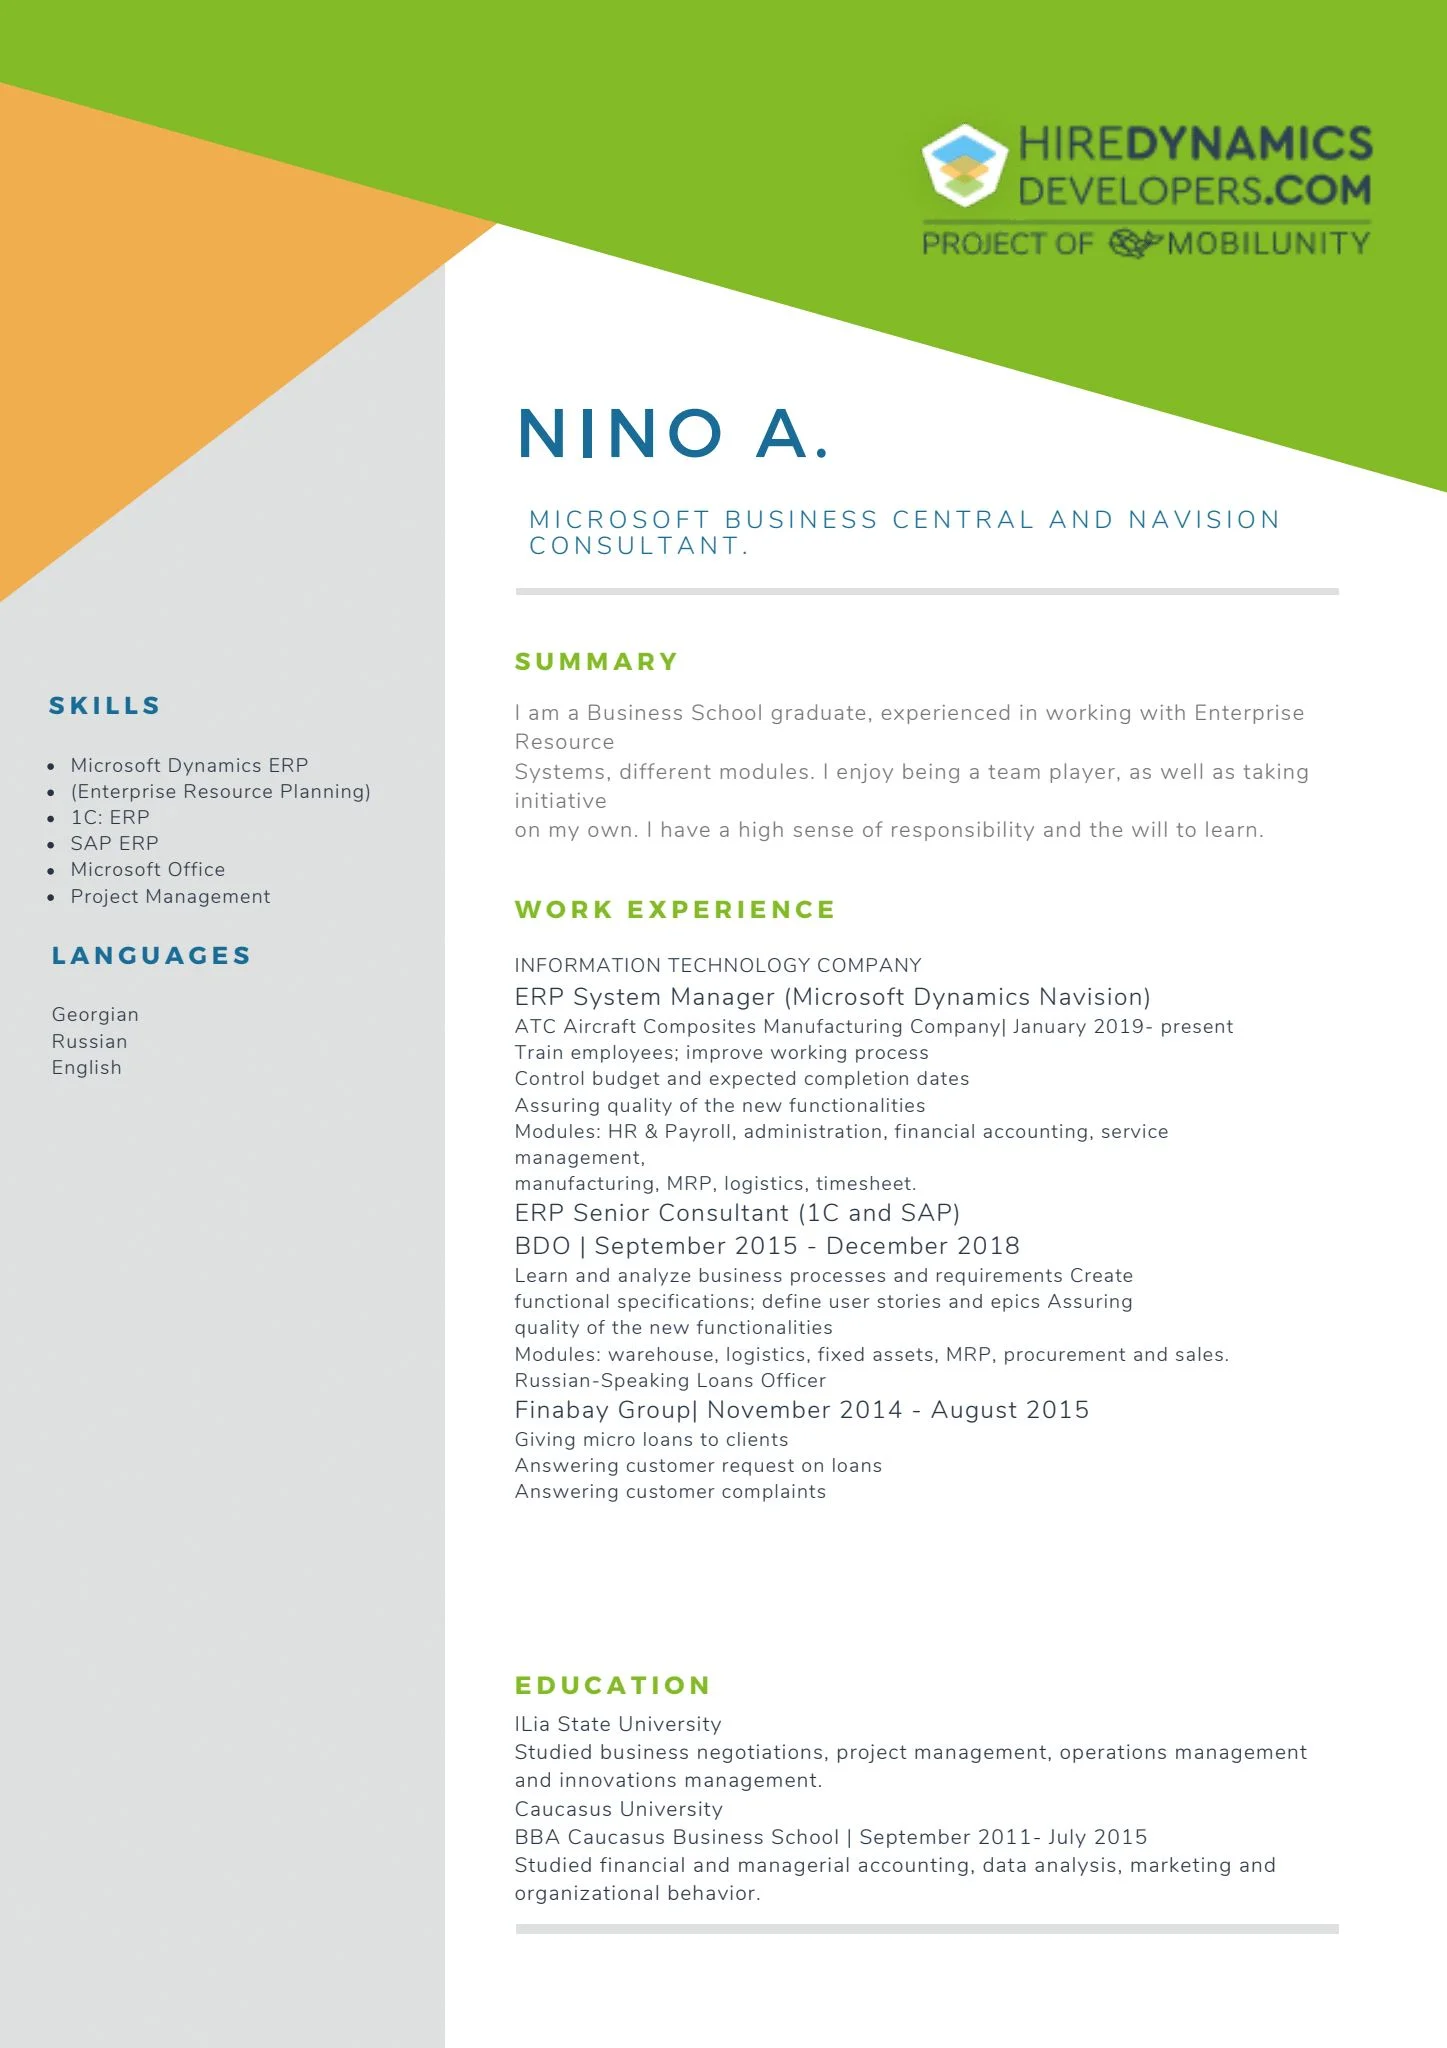 Nino A. – Microsoft Business Central and Navision Consultant